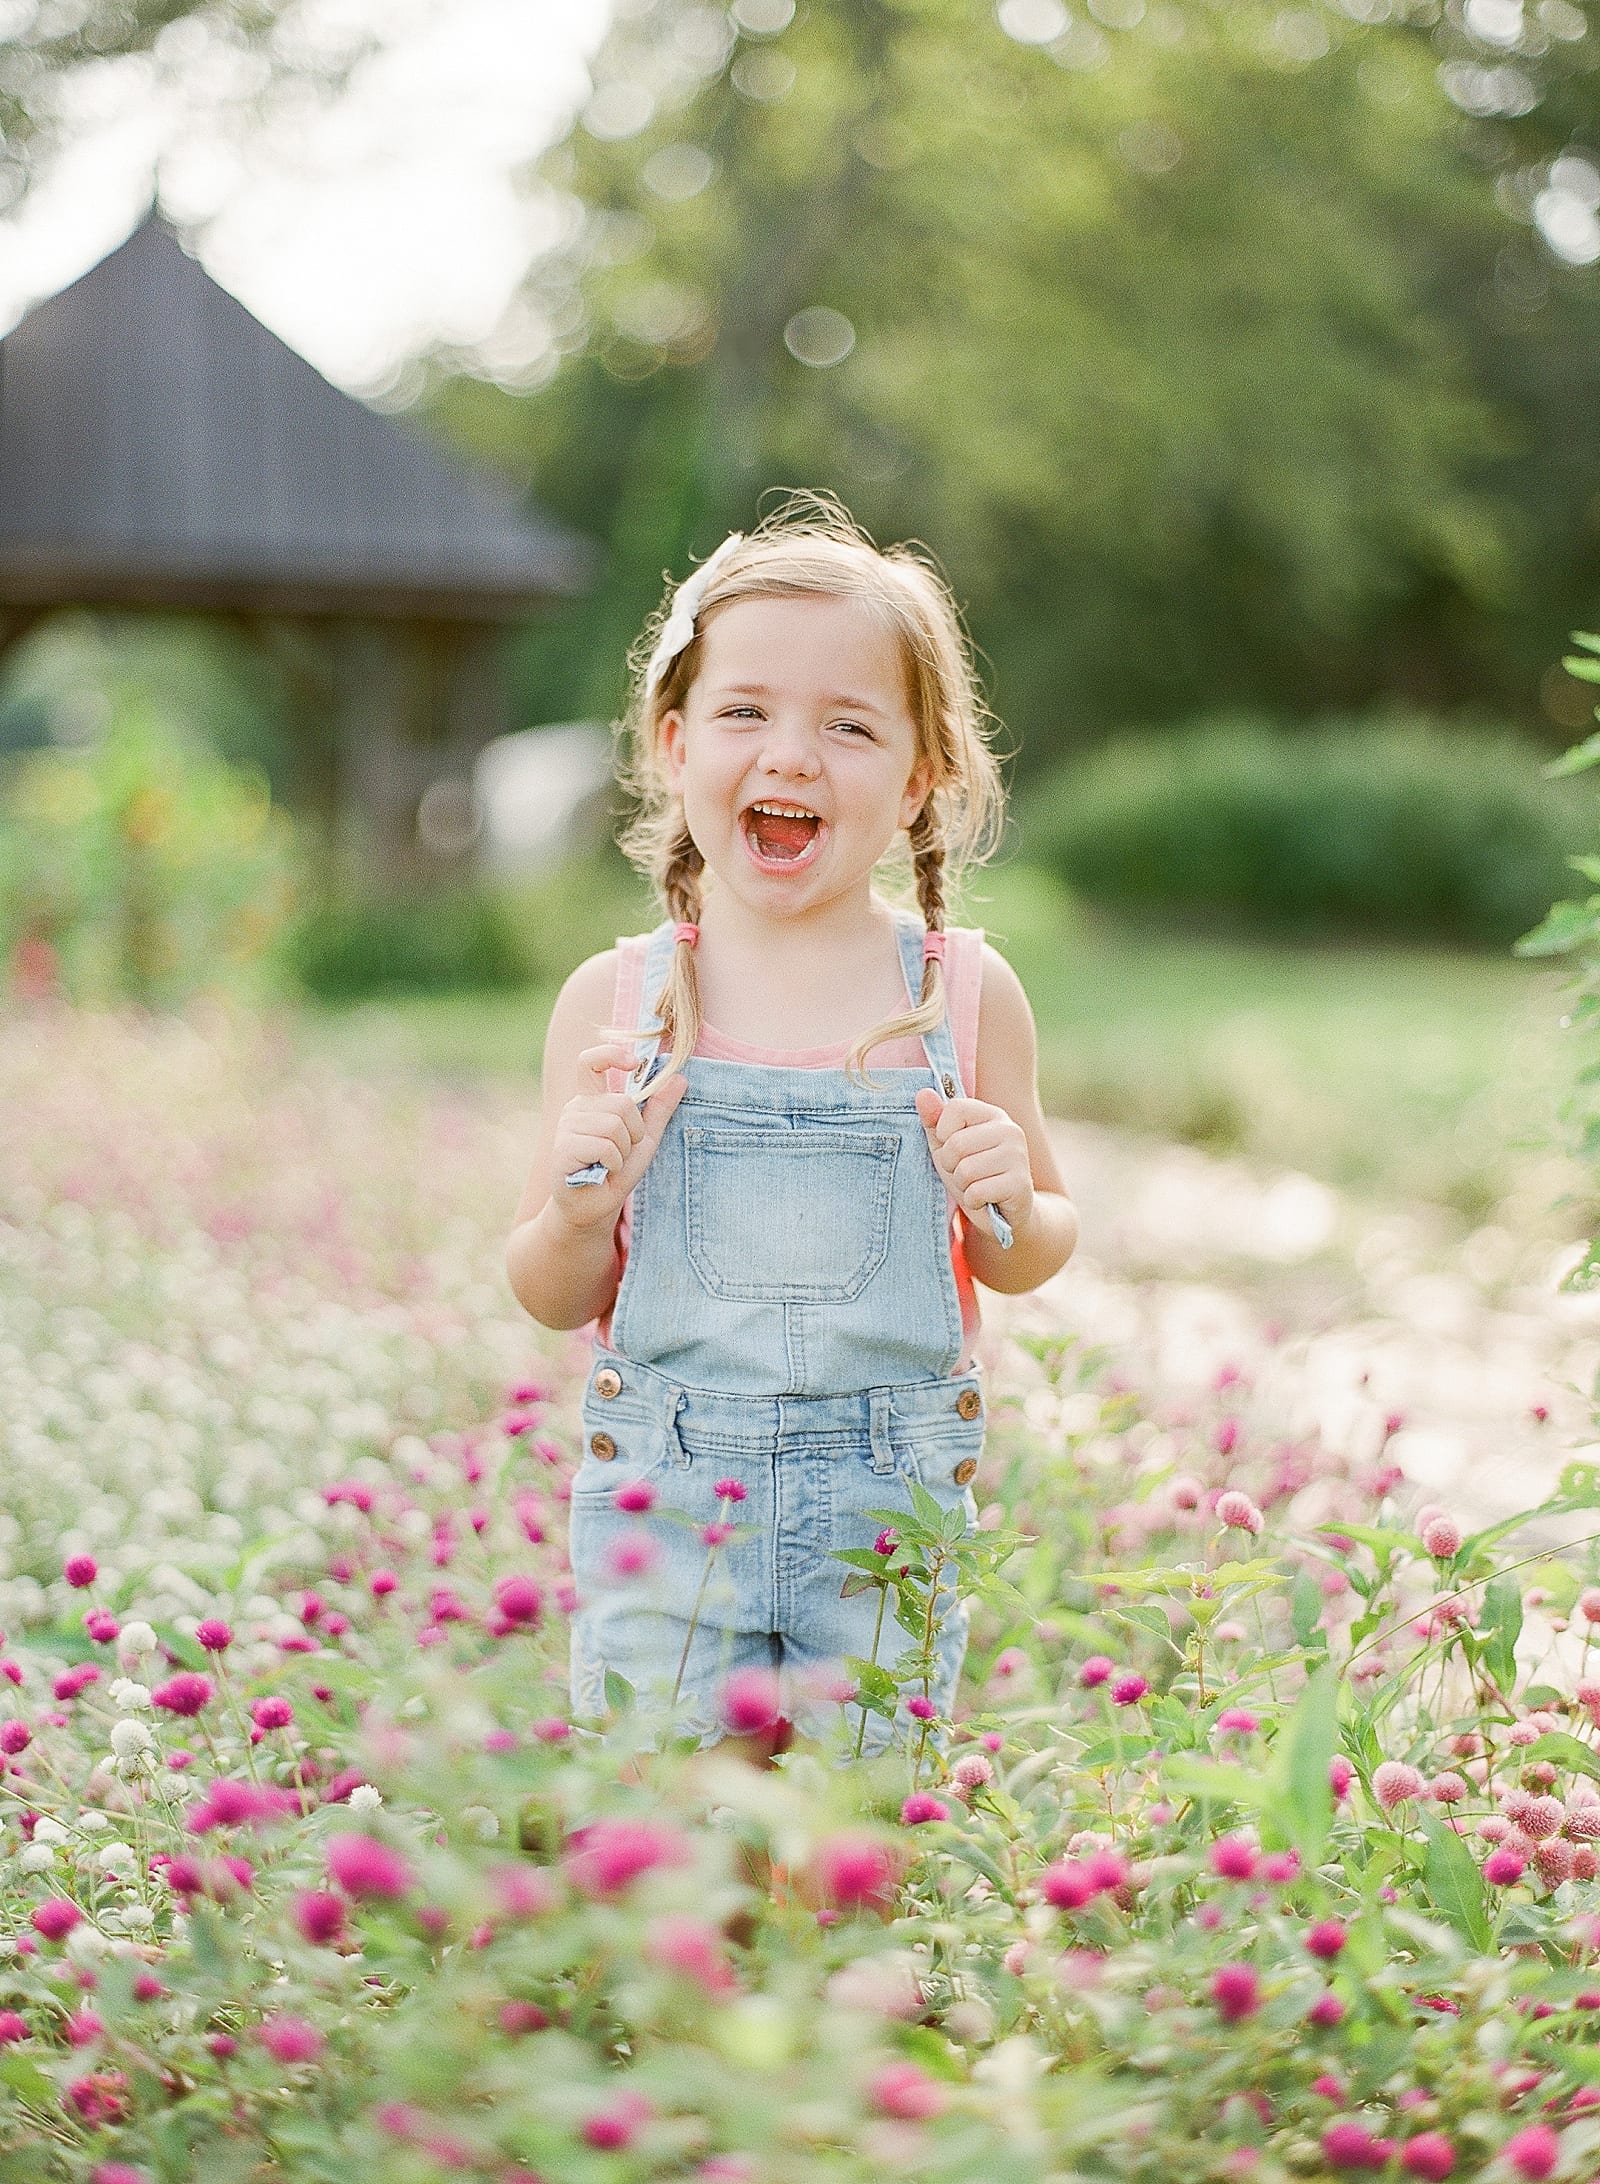 Little Girl in Overalls Laughing in Flowers Photo